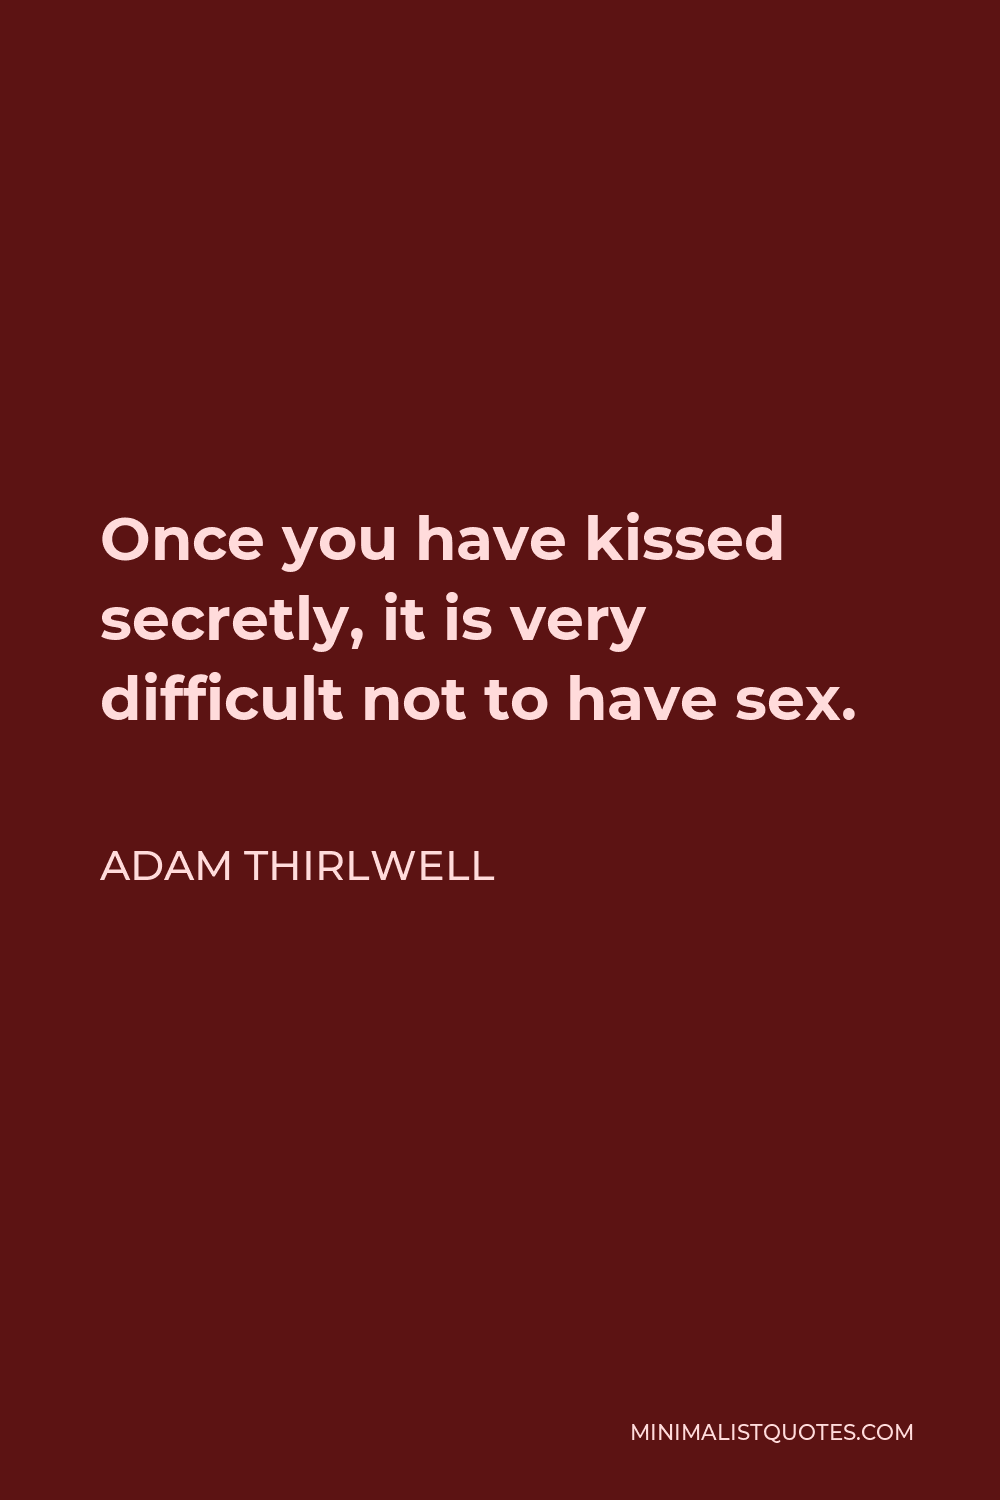 Adam Thirlwell Quote - Once you have kissed secretly, it is very difficult not to have sex.